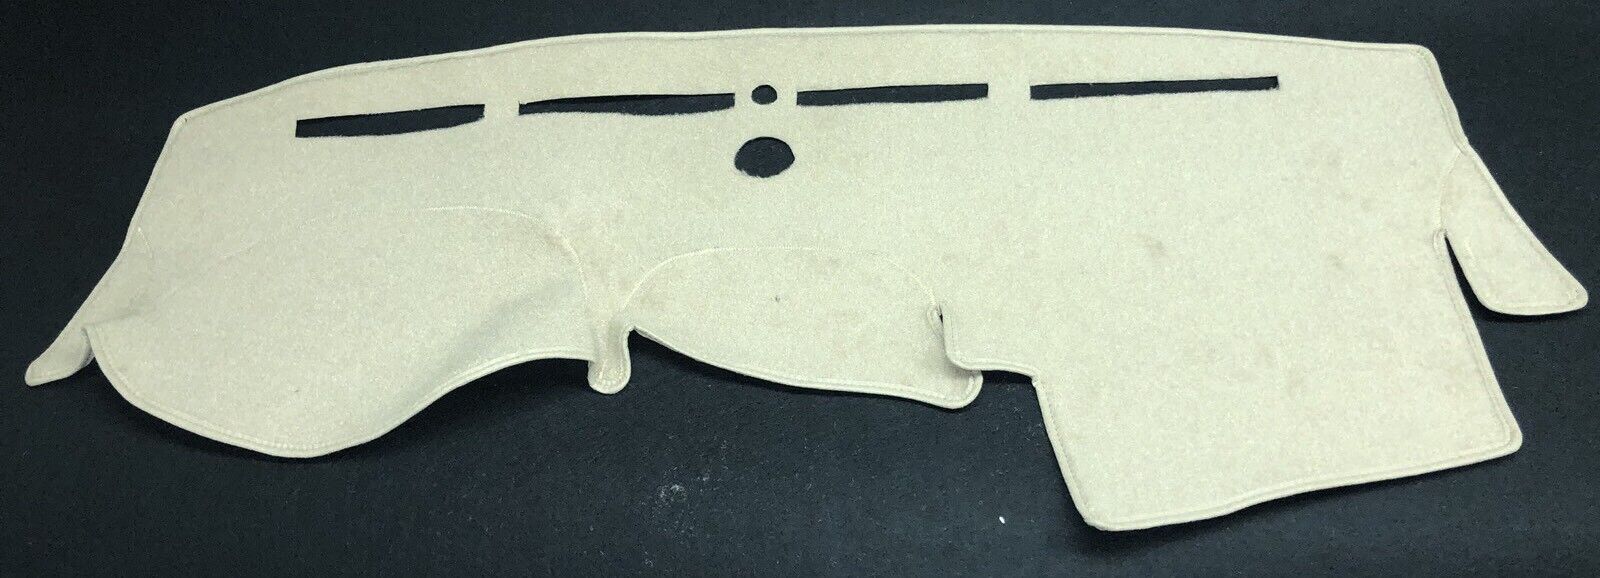 2003-2004-2005-2006-2007 CADILLAC CTS DASH COVER BEIGE POLYCARPET